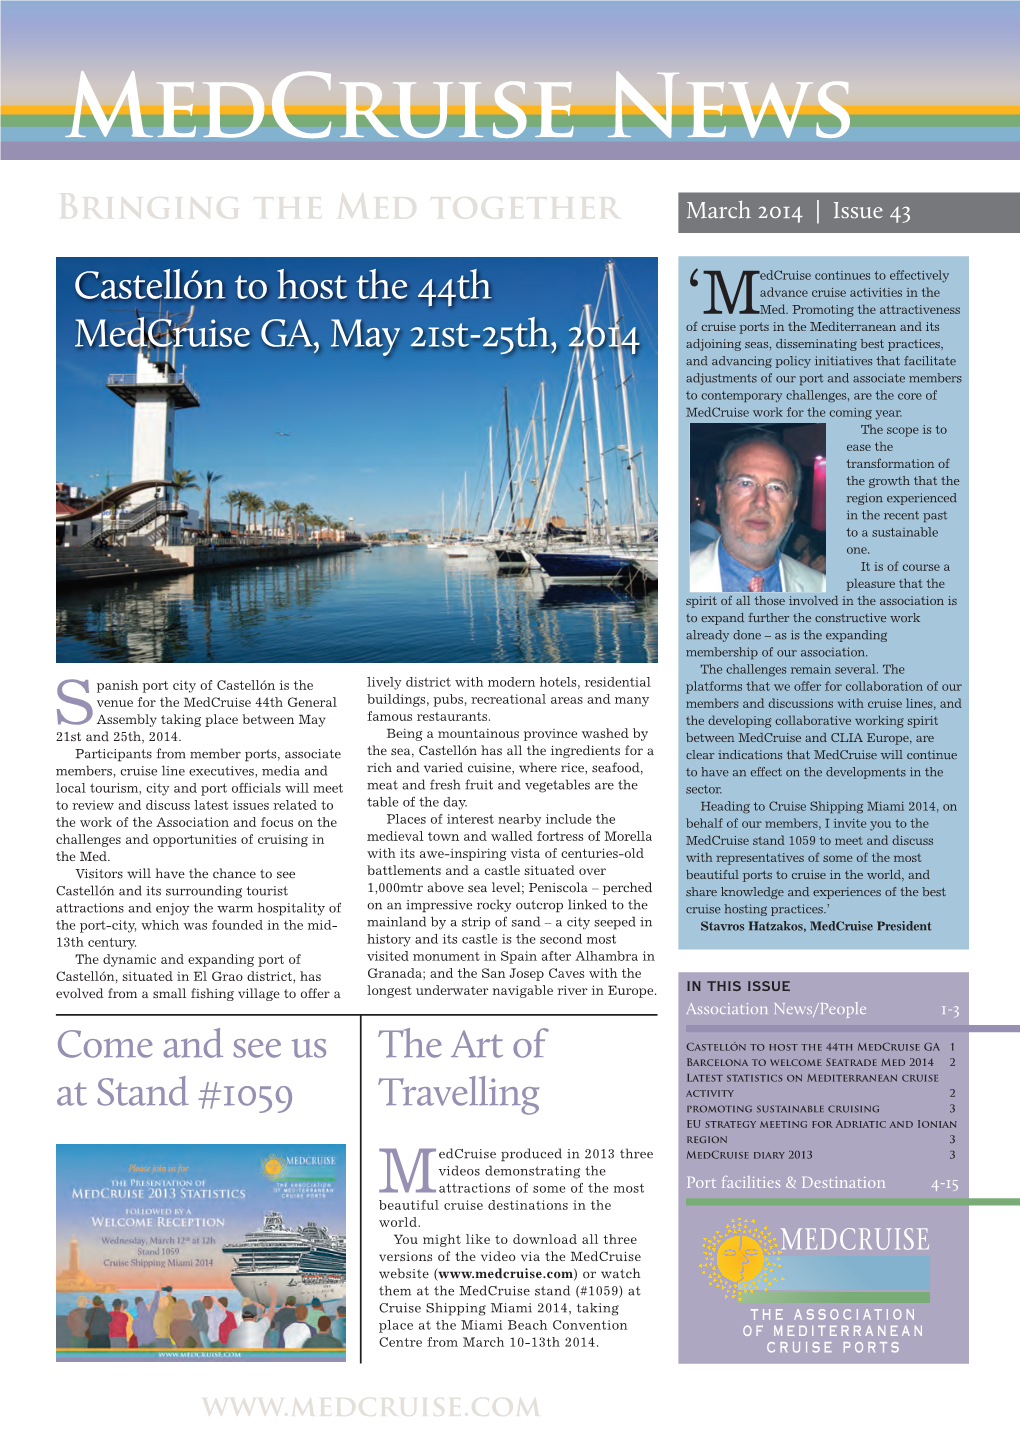 MEDCRUISE Newsletter Issue 43 Mar 14 18/02/2014 15:22 Page 1 Medcruise News